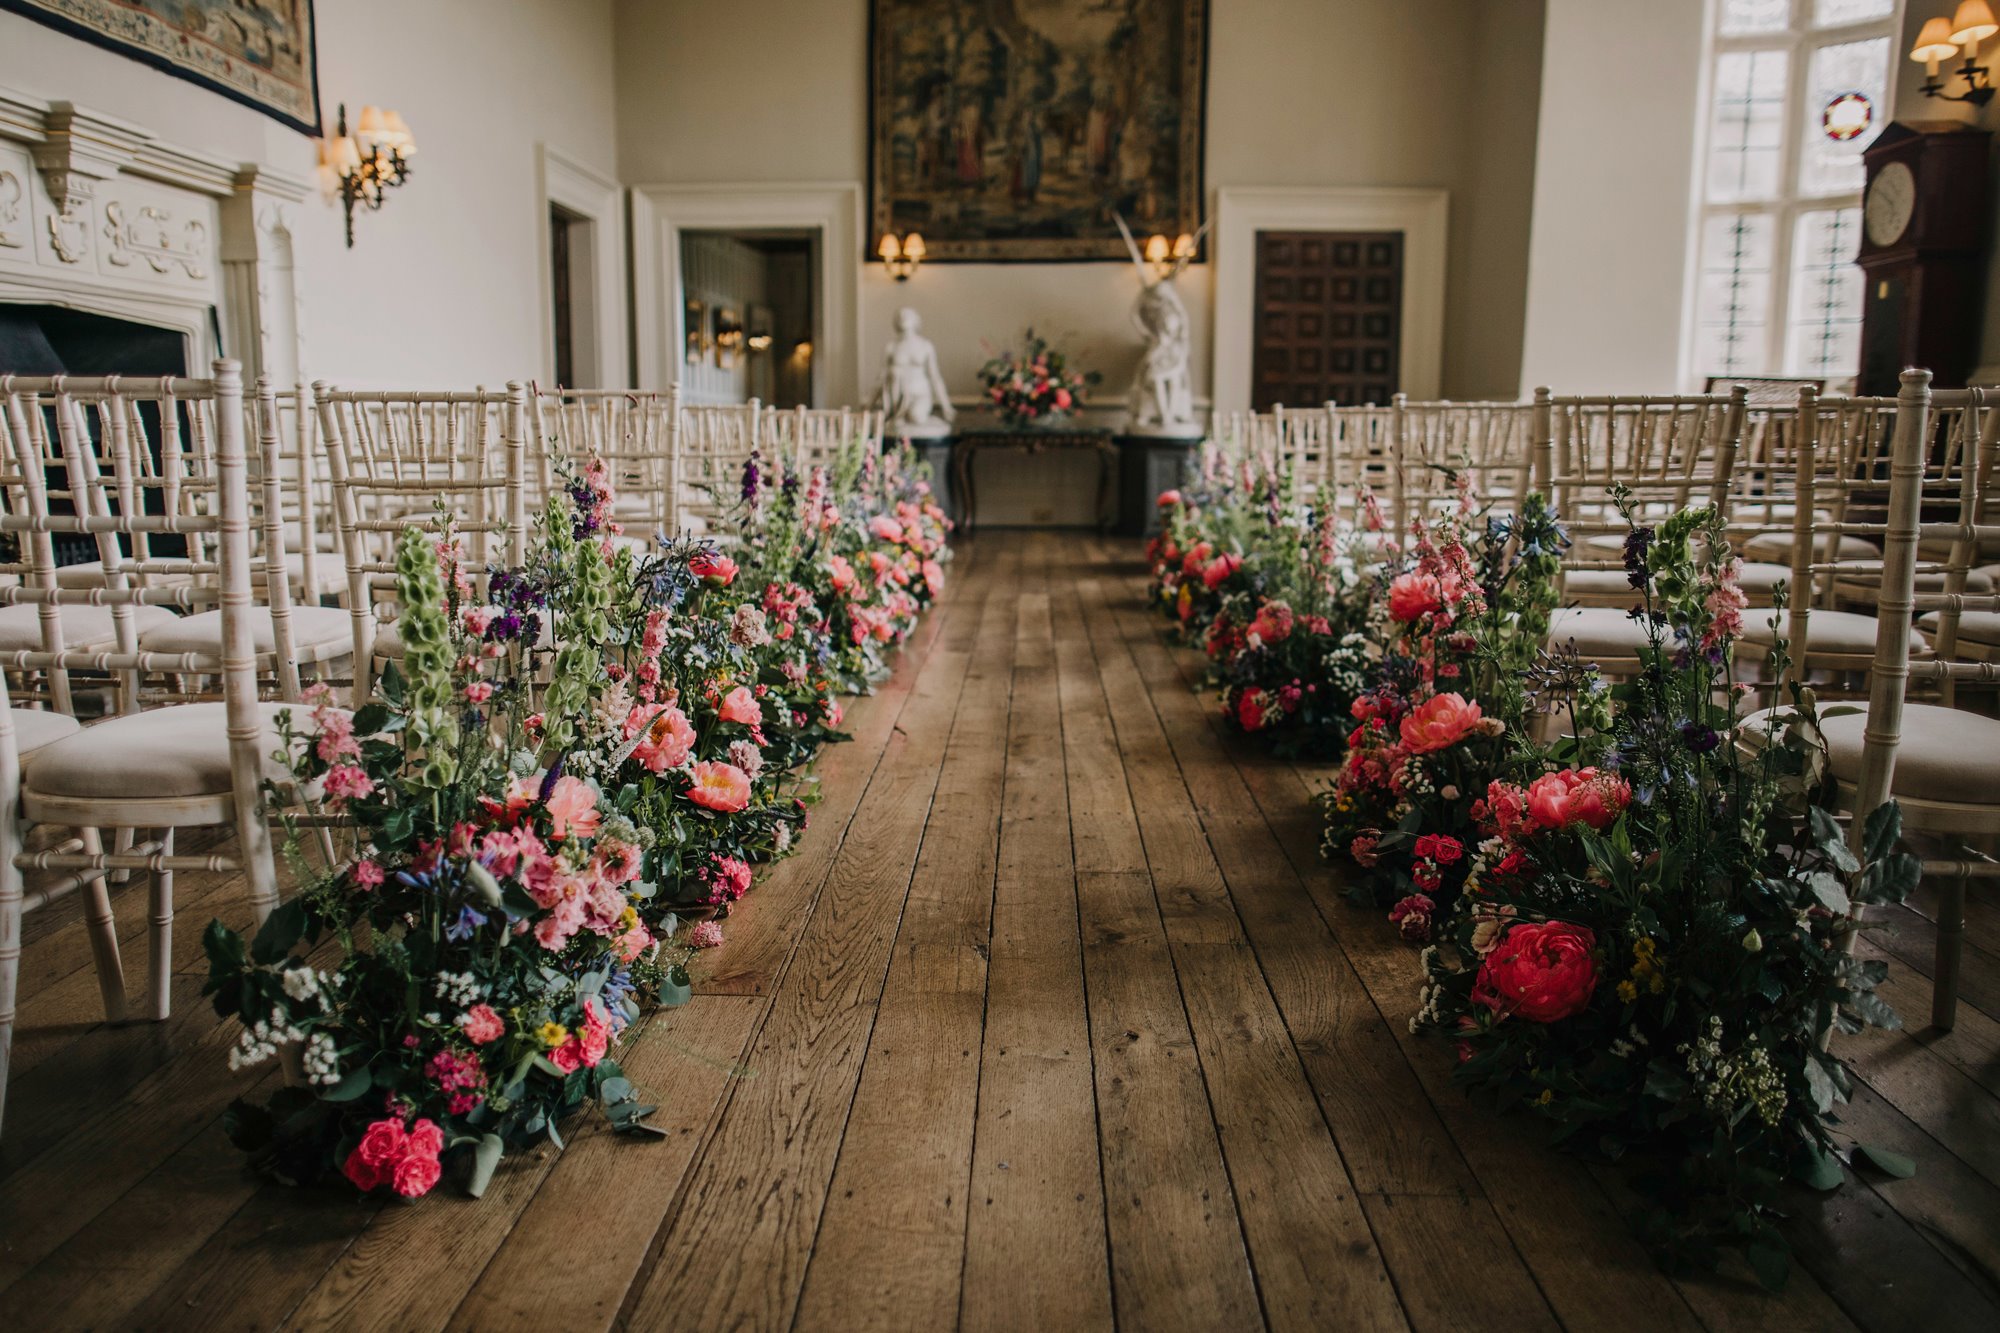 lovely display of pink and red flowers down the aisle of a wedding ceremony in a great hall